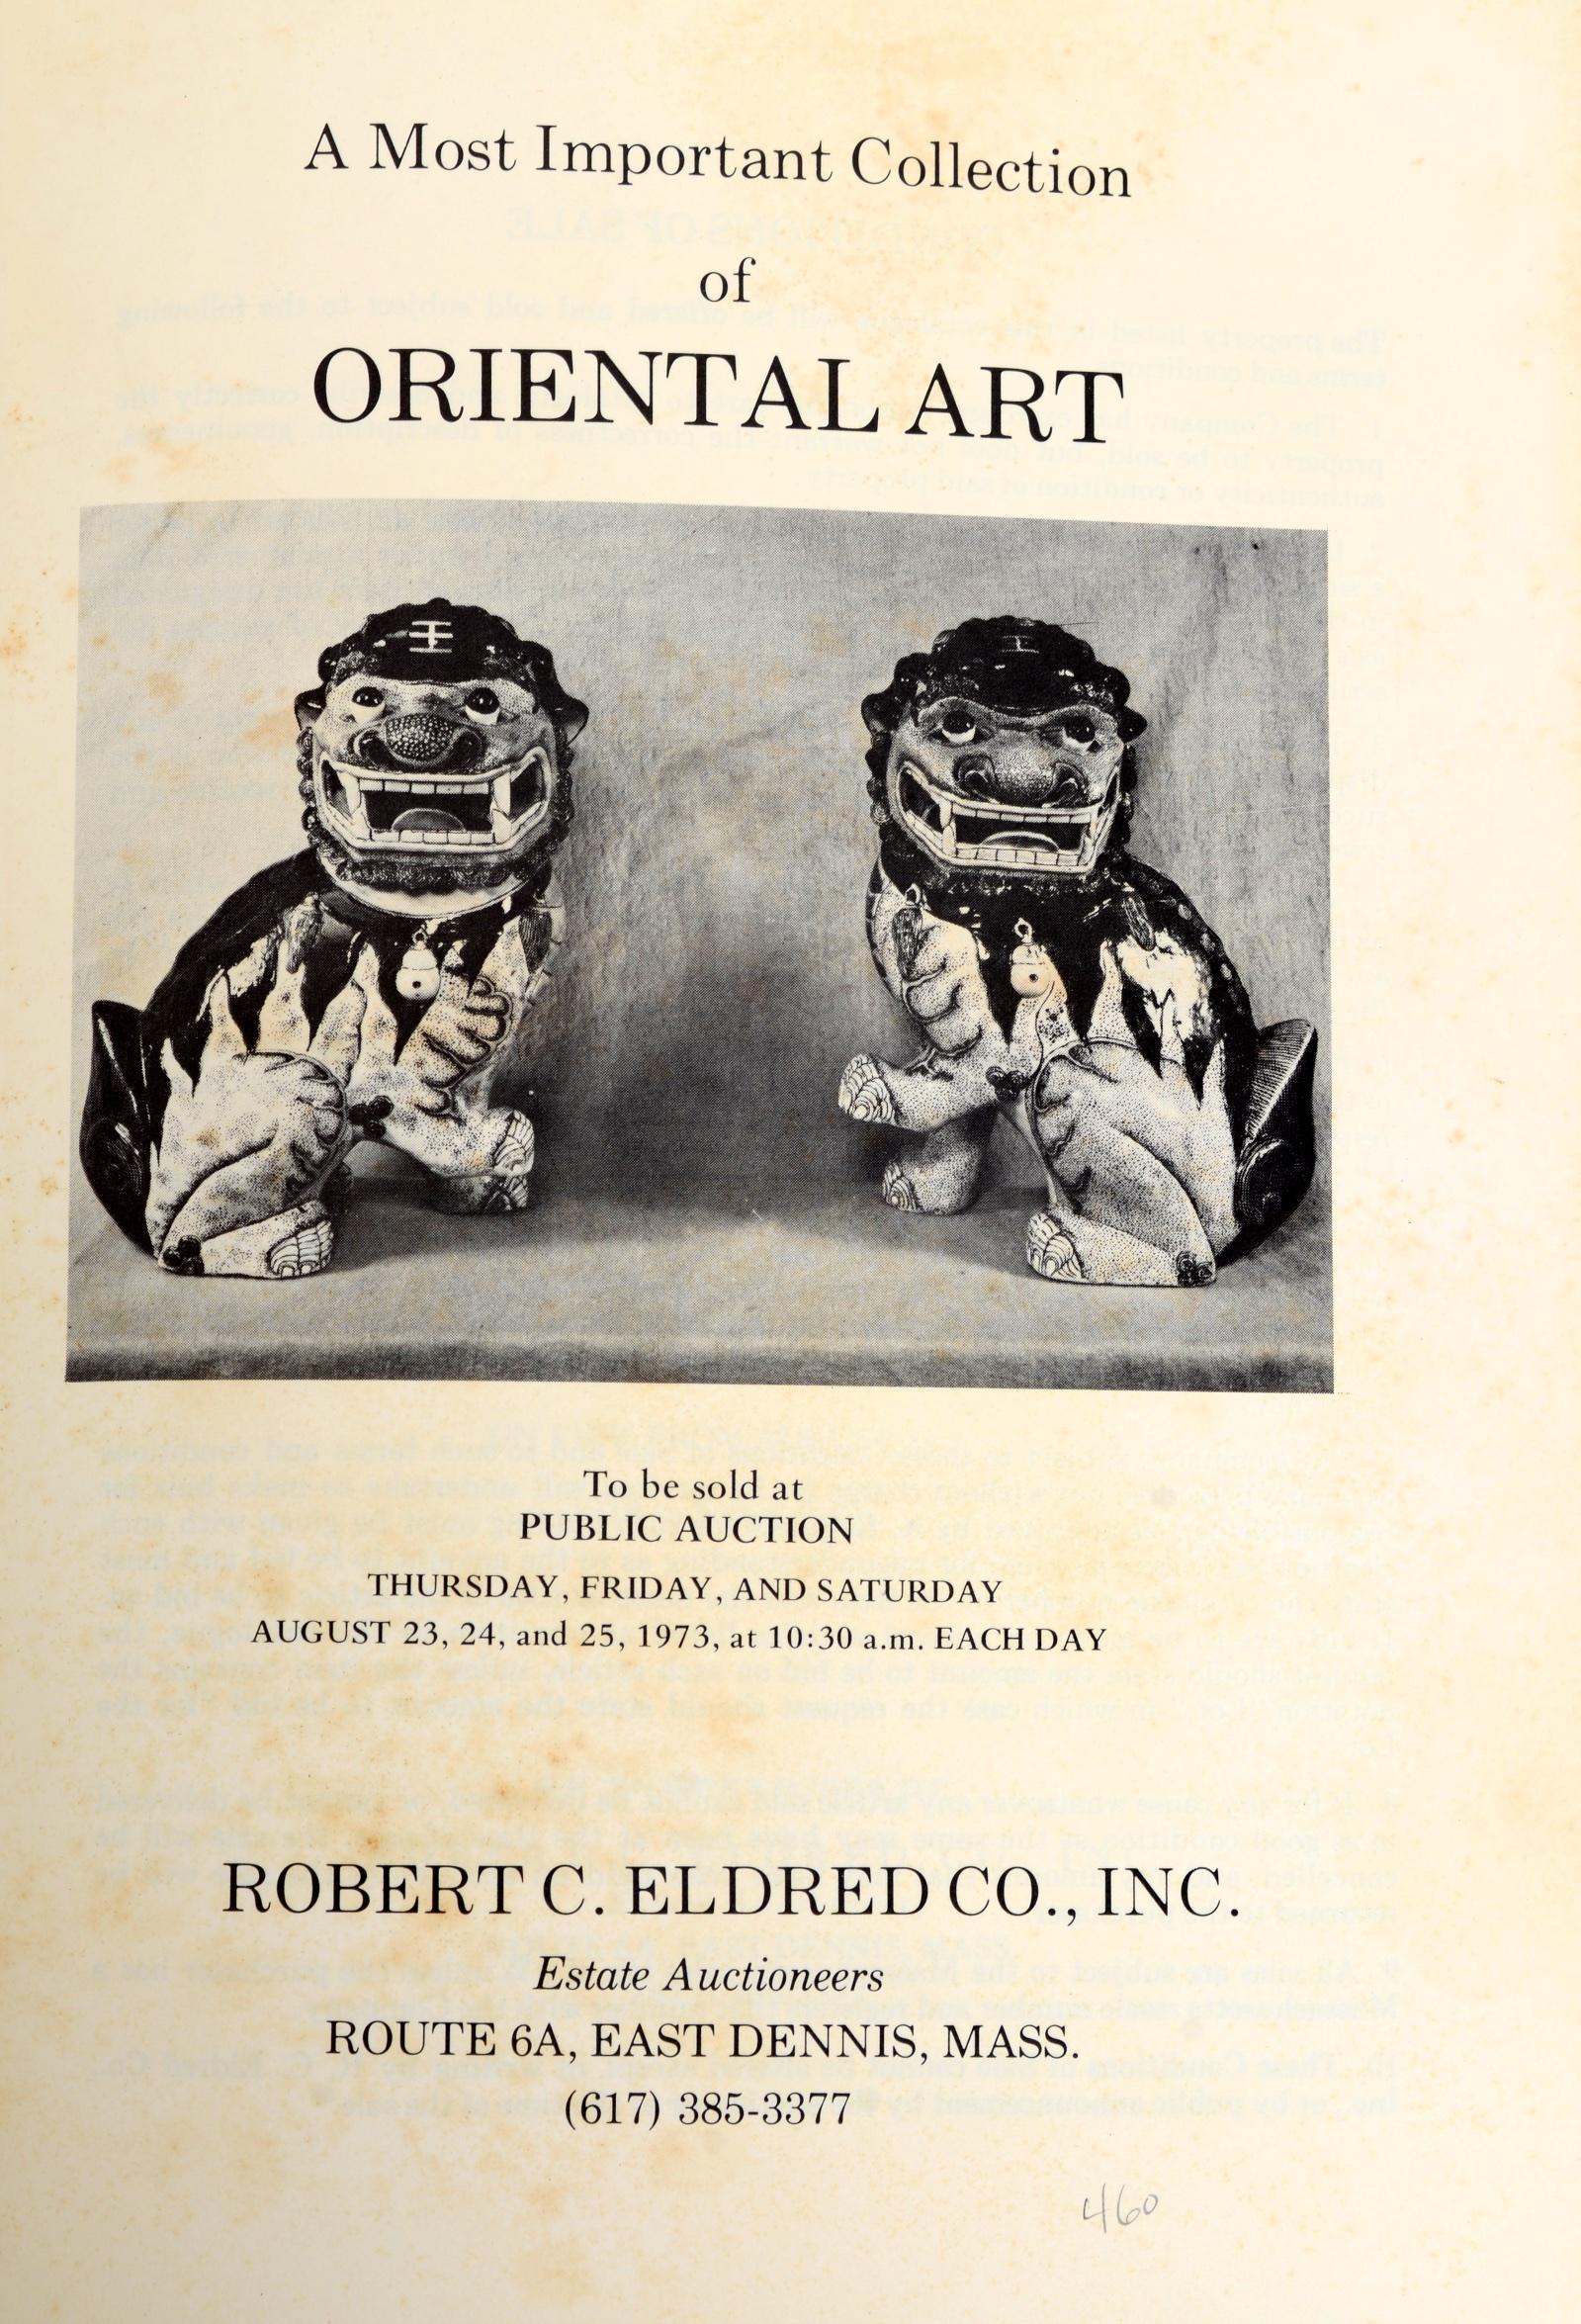 American Oriental Art at Auction, 1st Ed Presentation Copy, Eldred 1973 For Sale